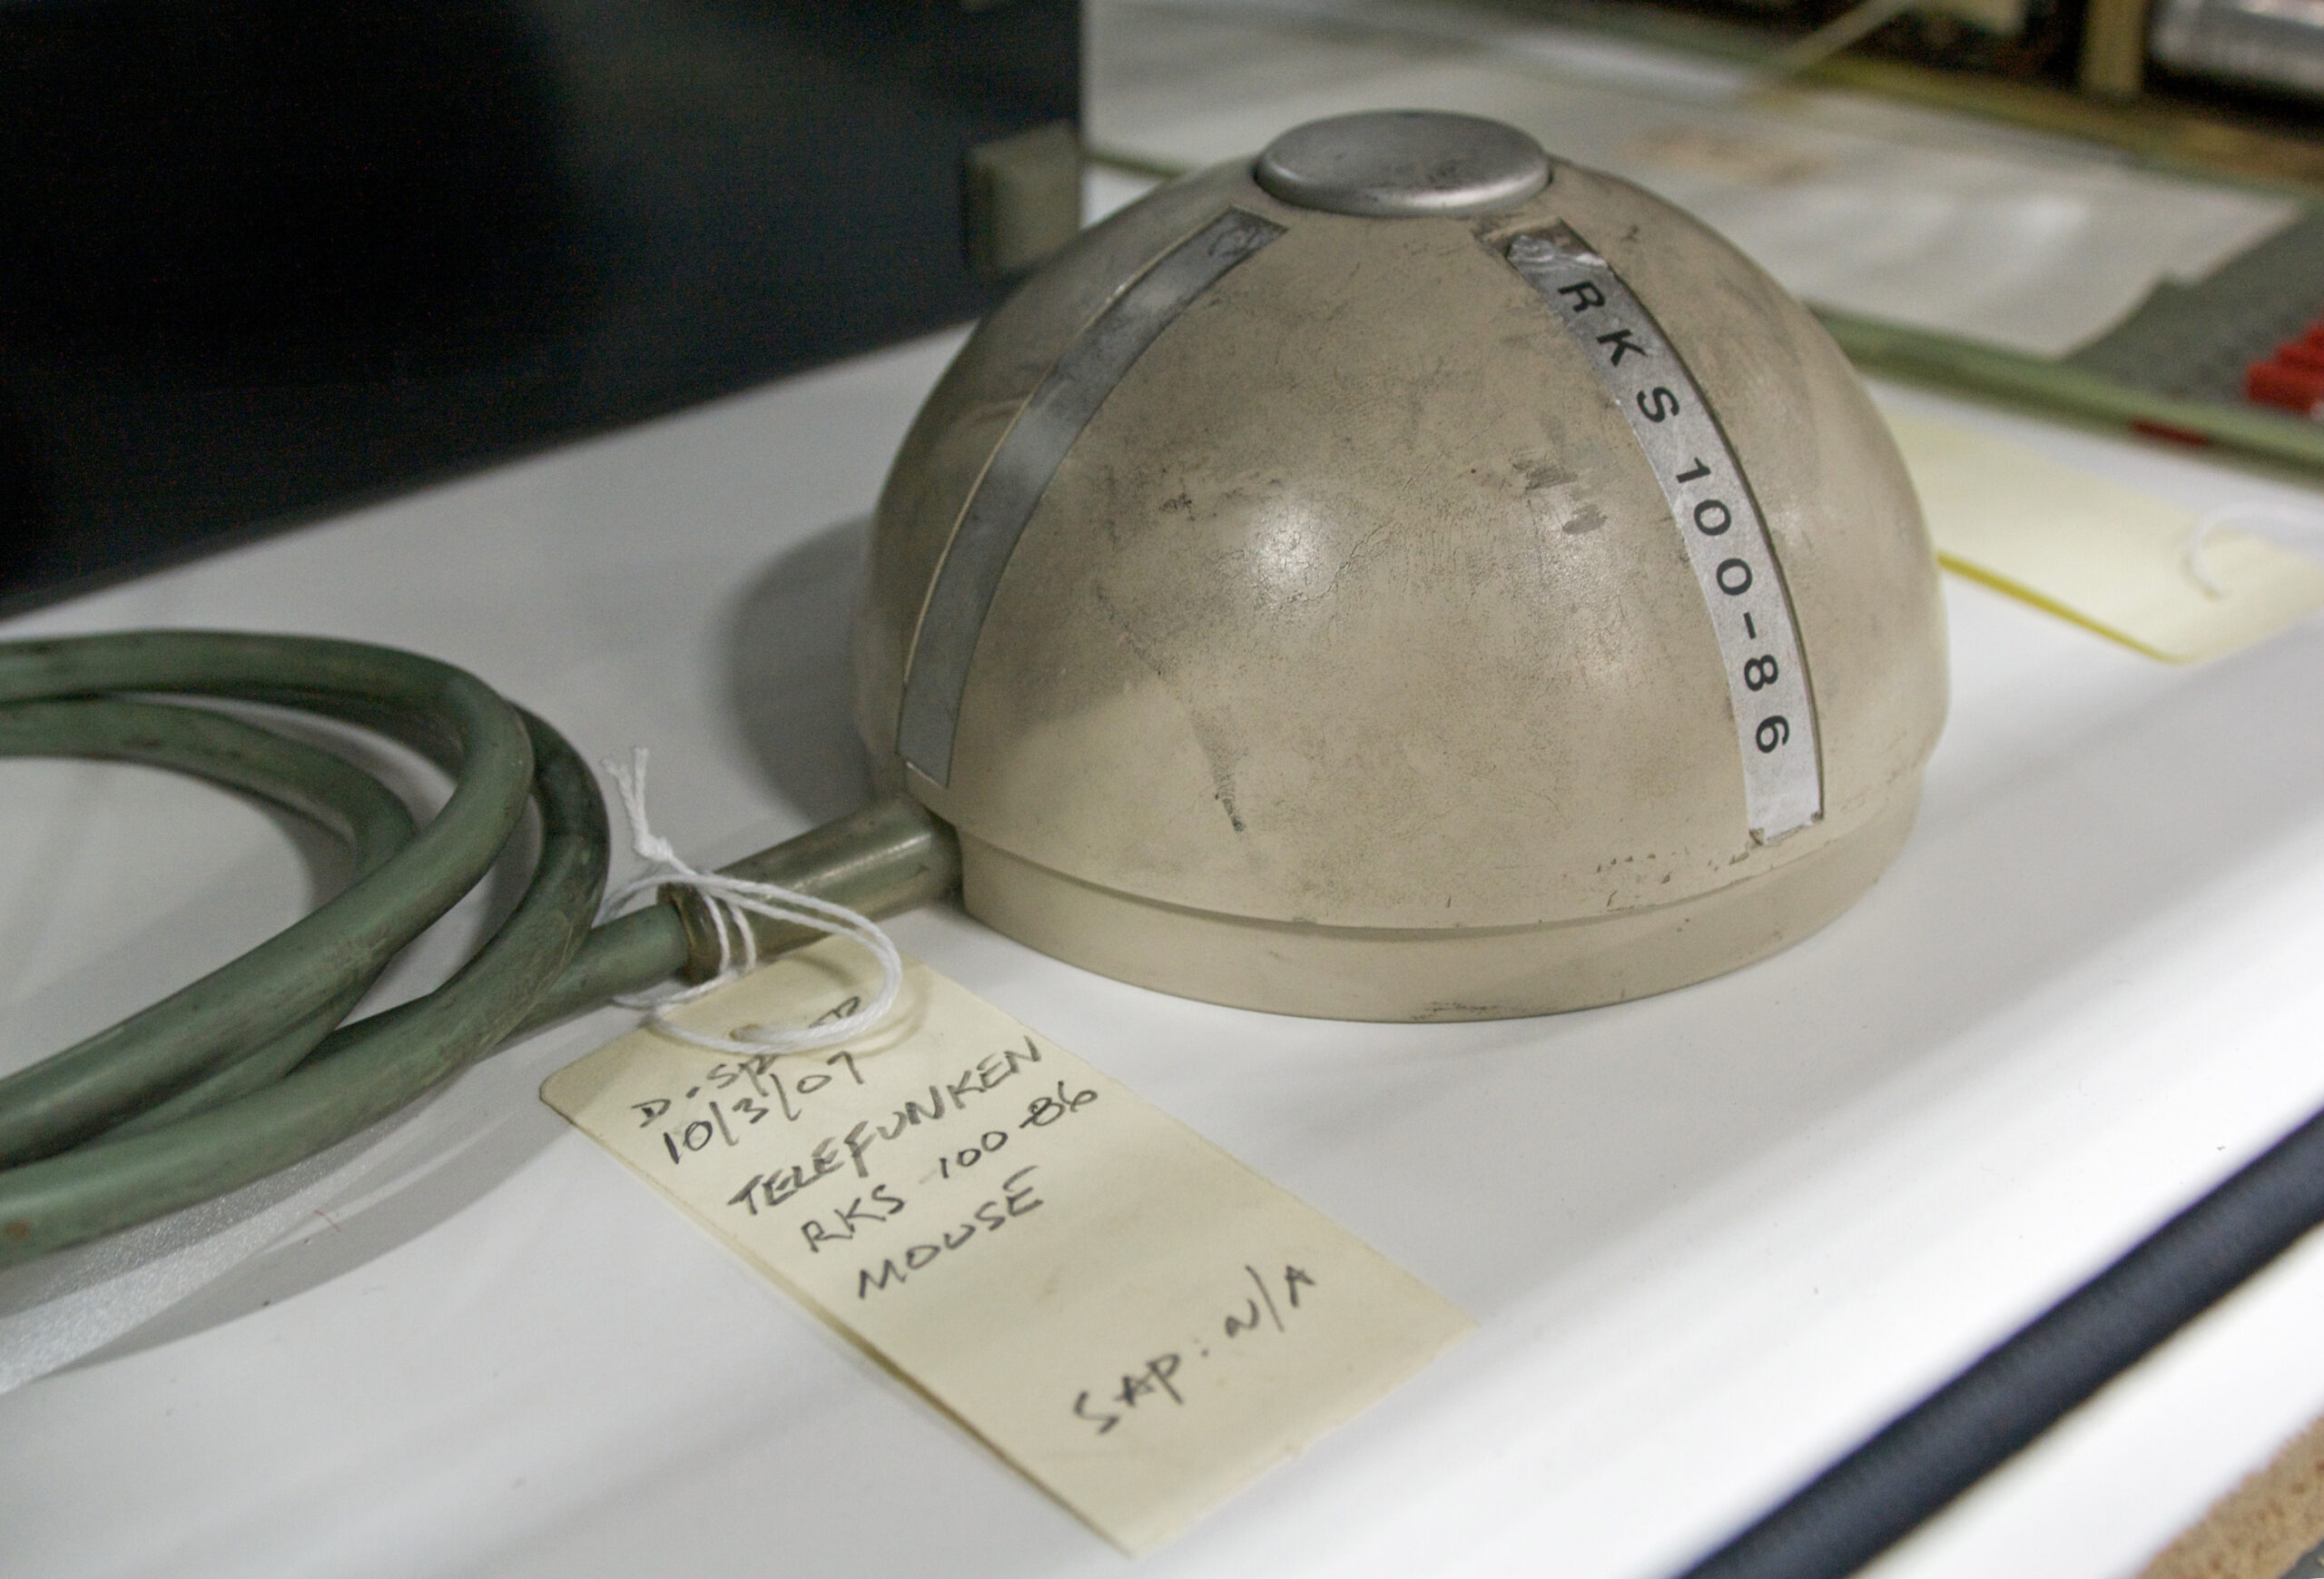 Photograph of an early rolling-ball mouse from the 1960s, shaped like half a cylinder and sitting on a desk with a label.